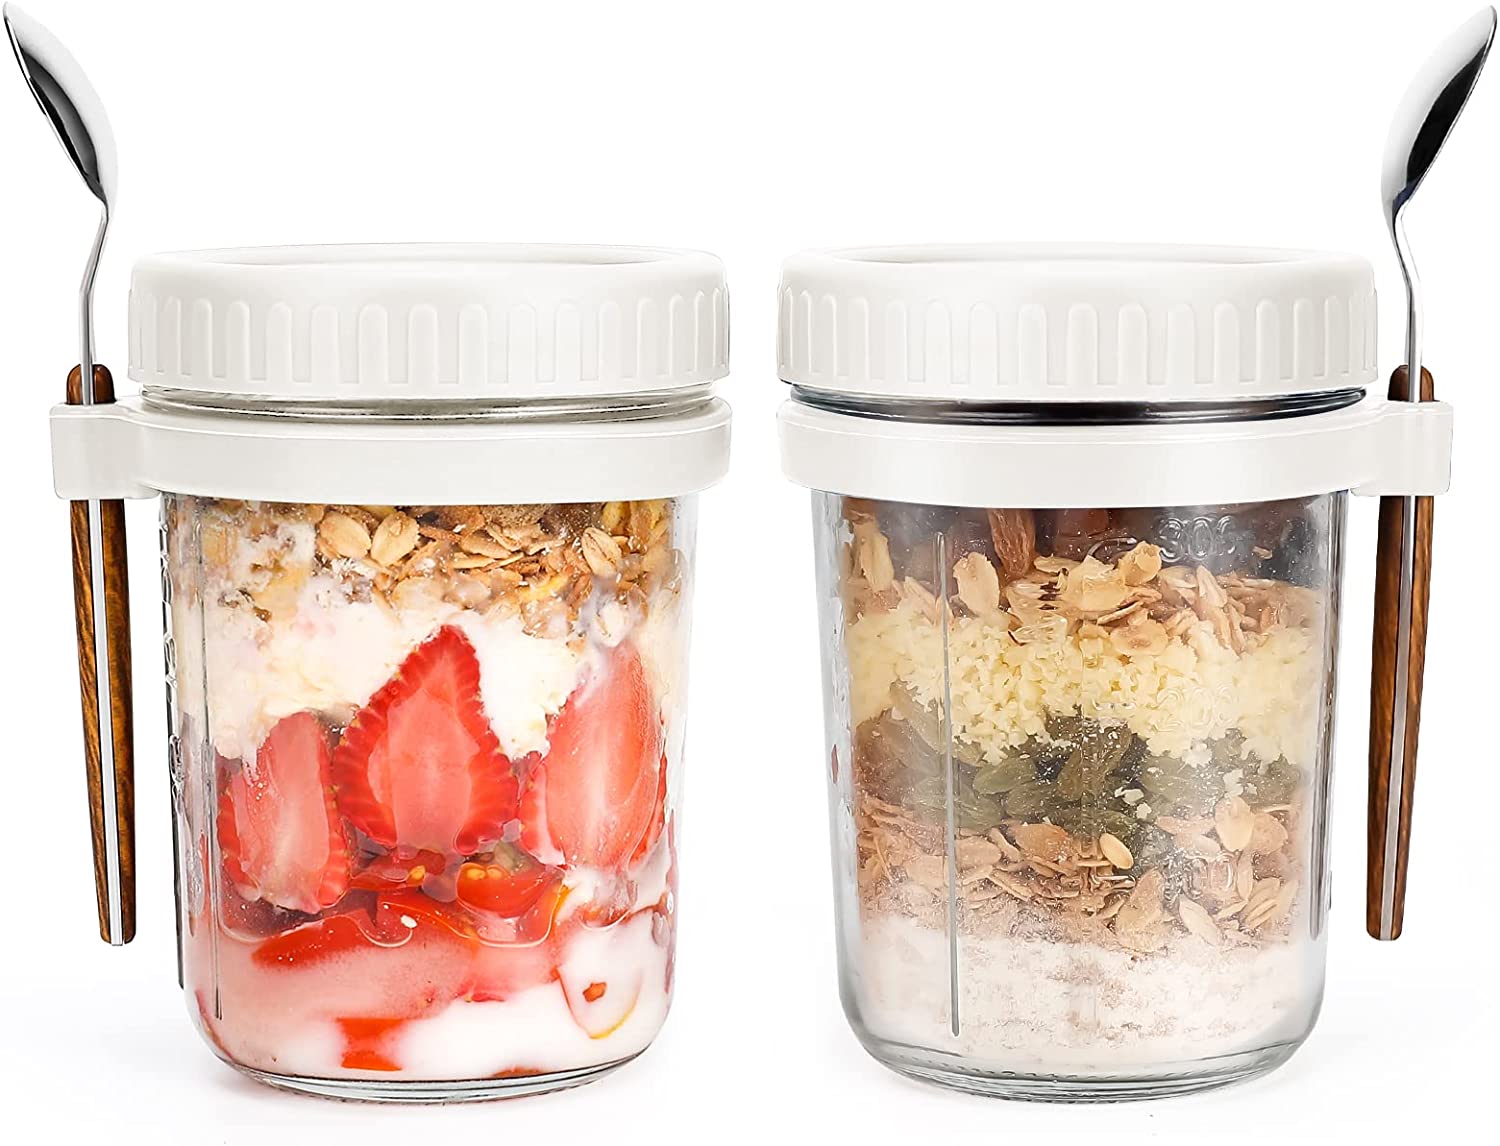  KITCHOP Overnight Oats Containers with Lids and Spoon